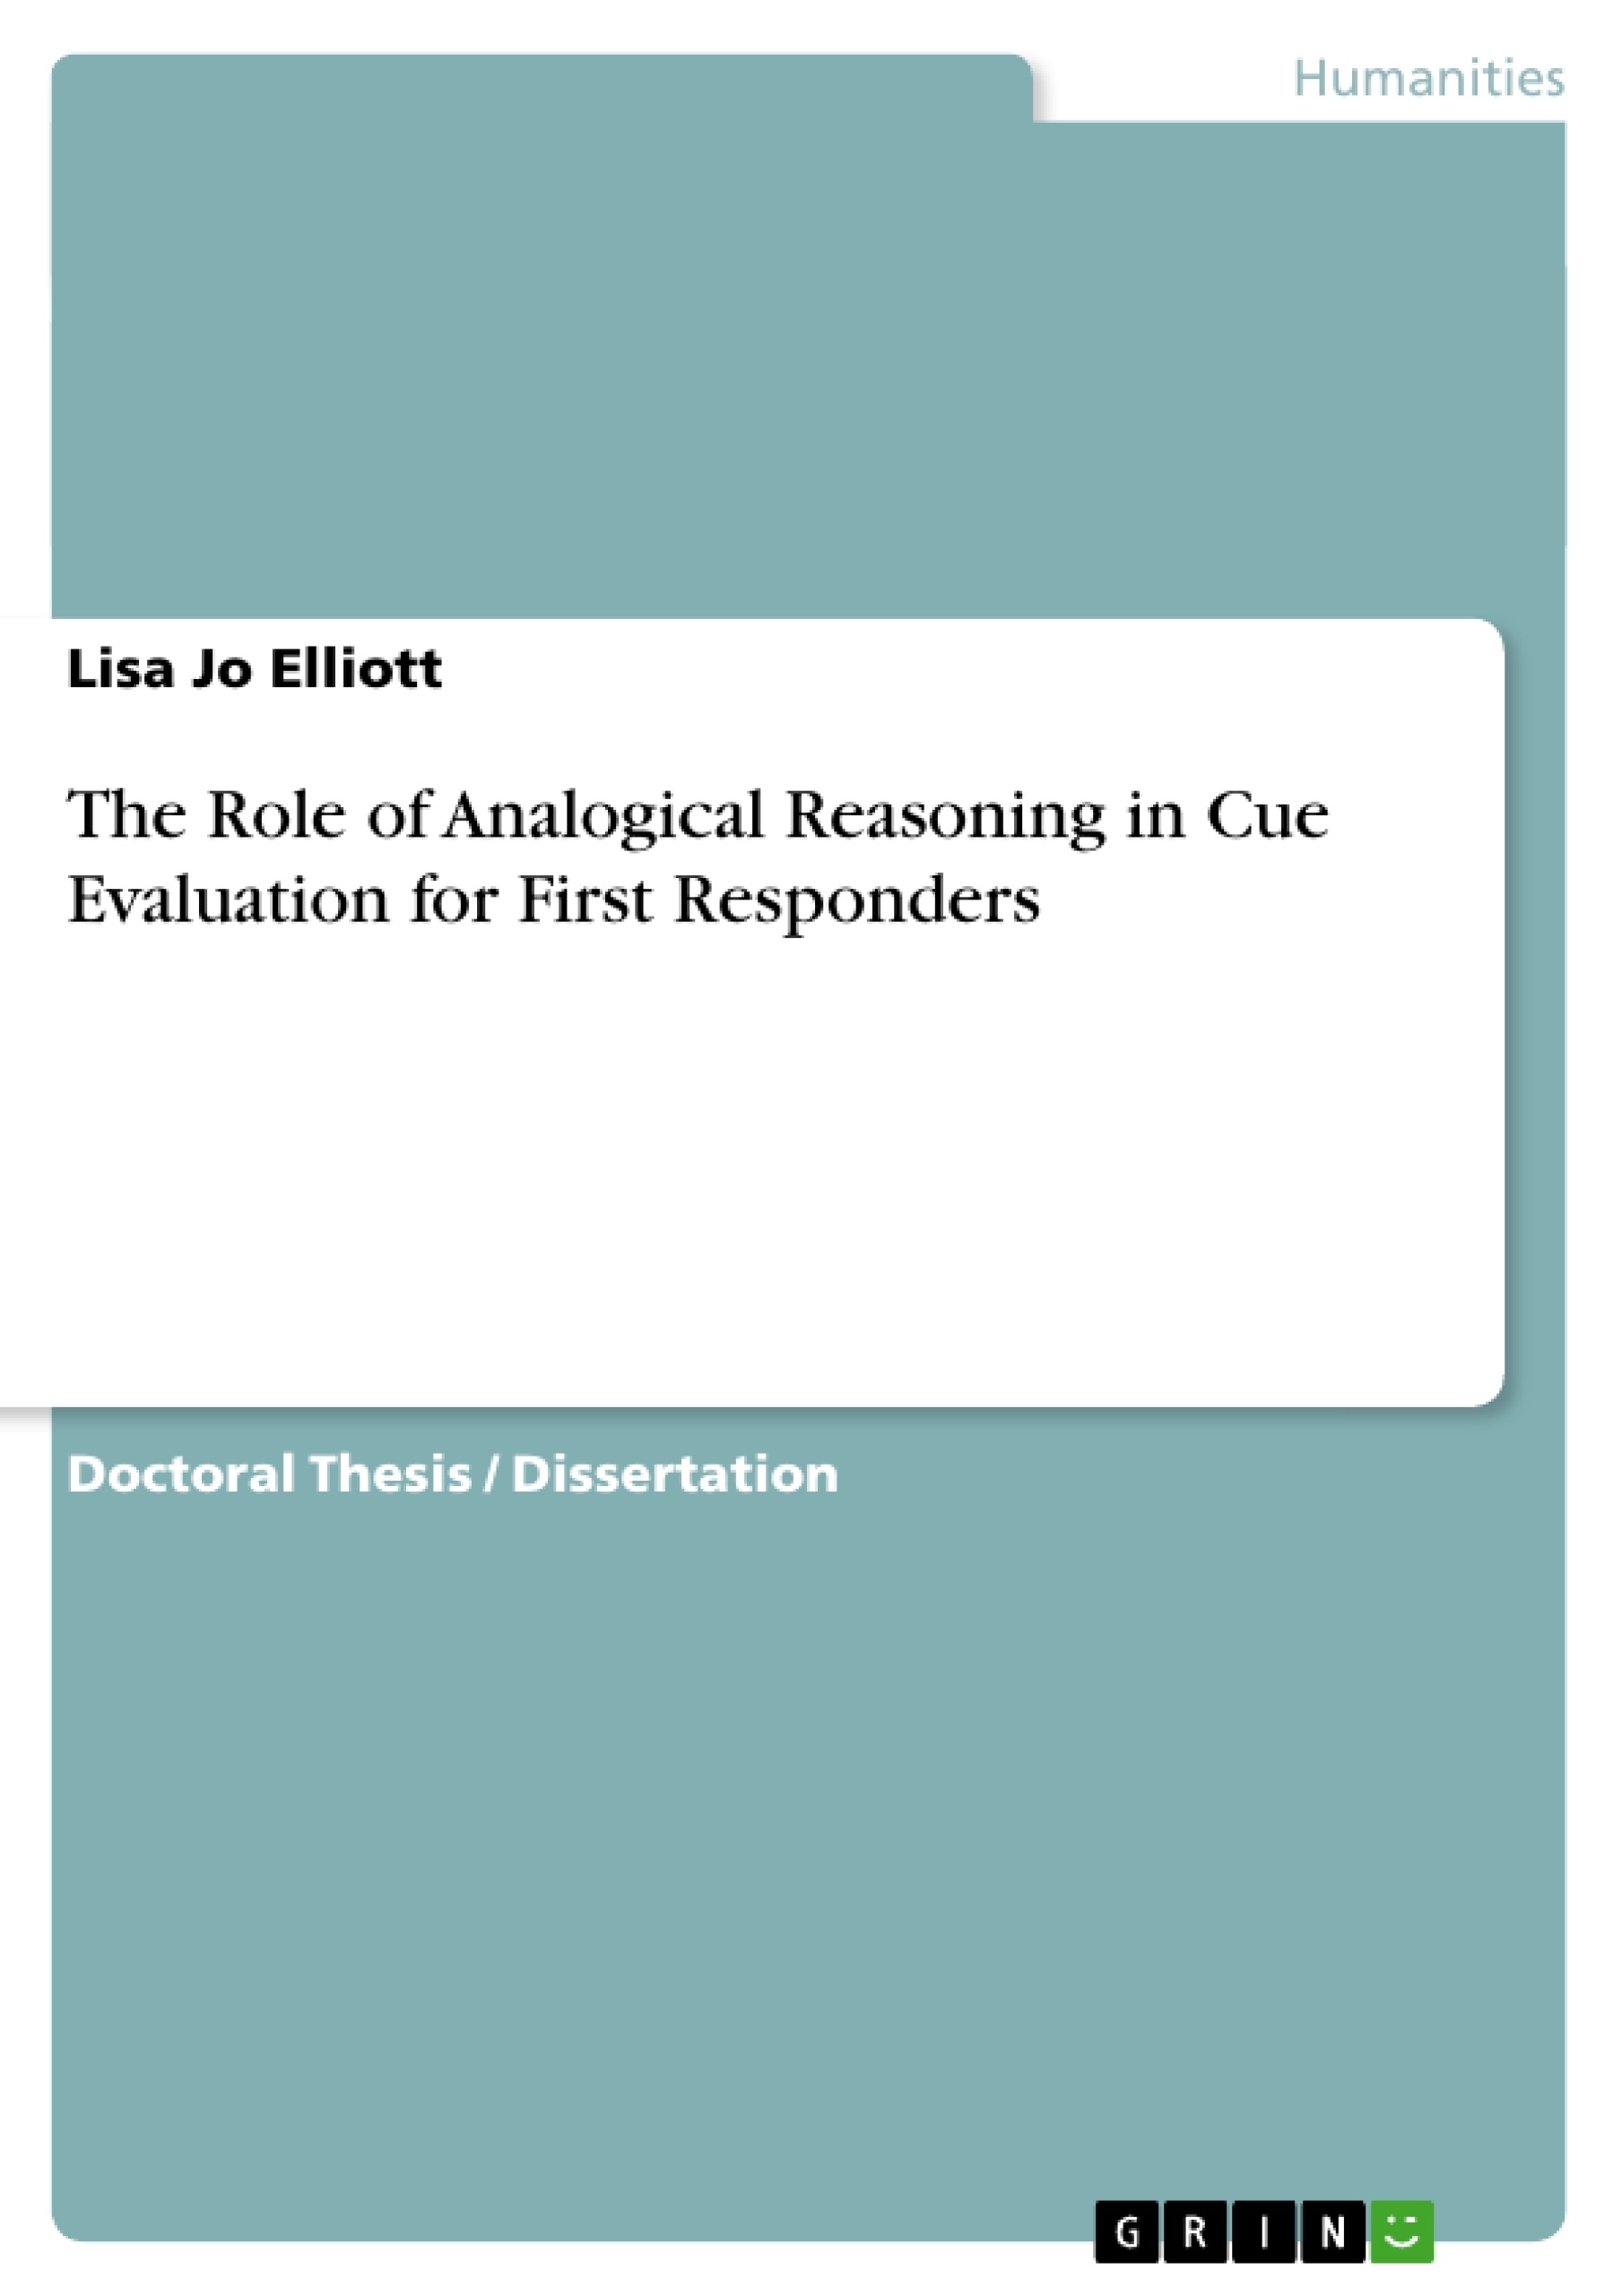 Titre: The Role of Analogical Reasoning in Cue Evaluation for First Responders